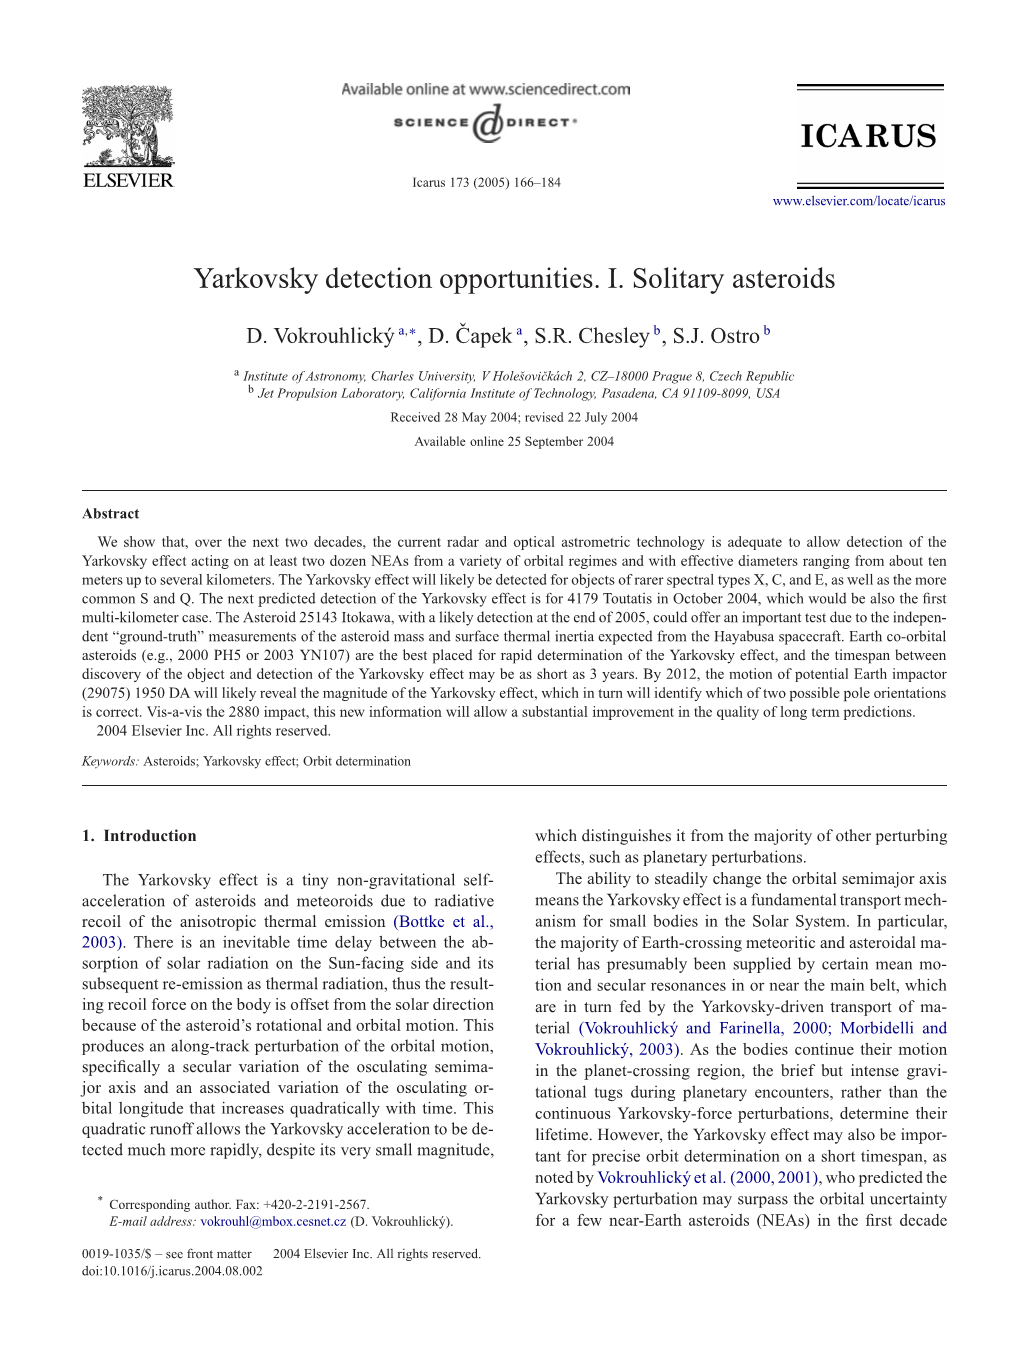 Yarkovsky Detection Opportunities. I. Solitary Asteroids